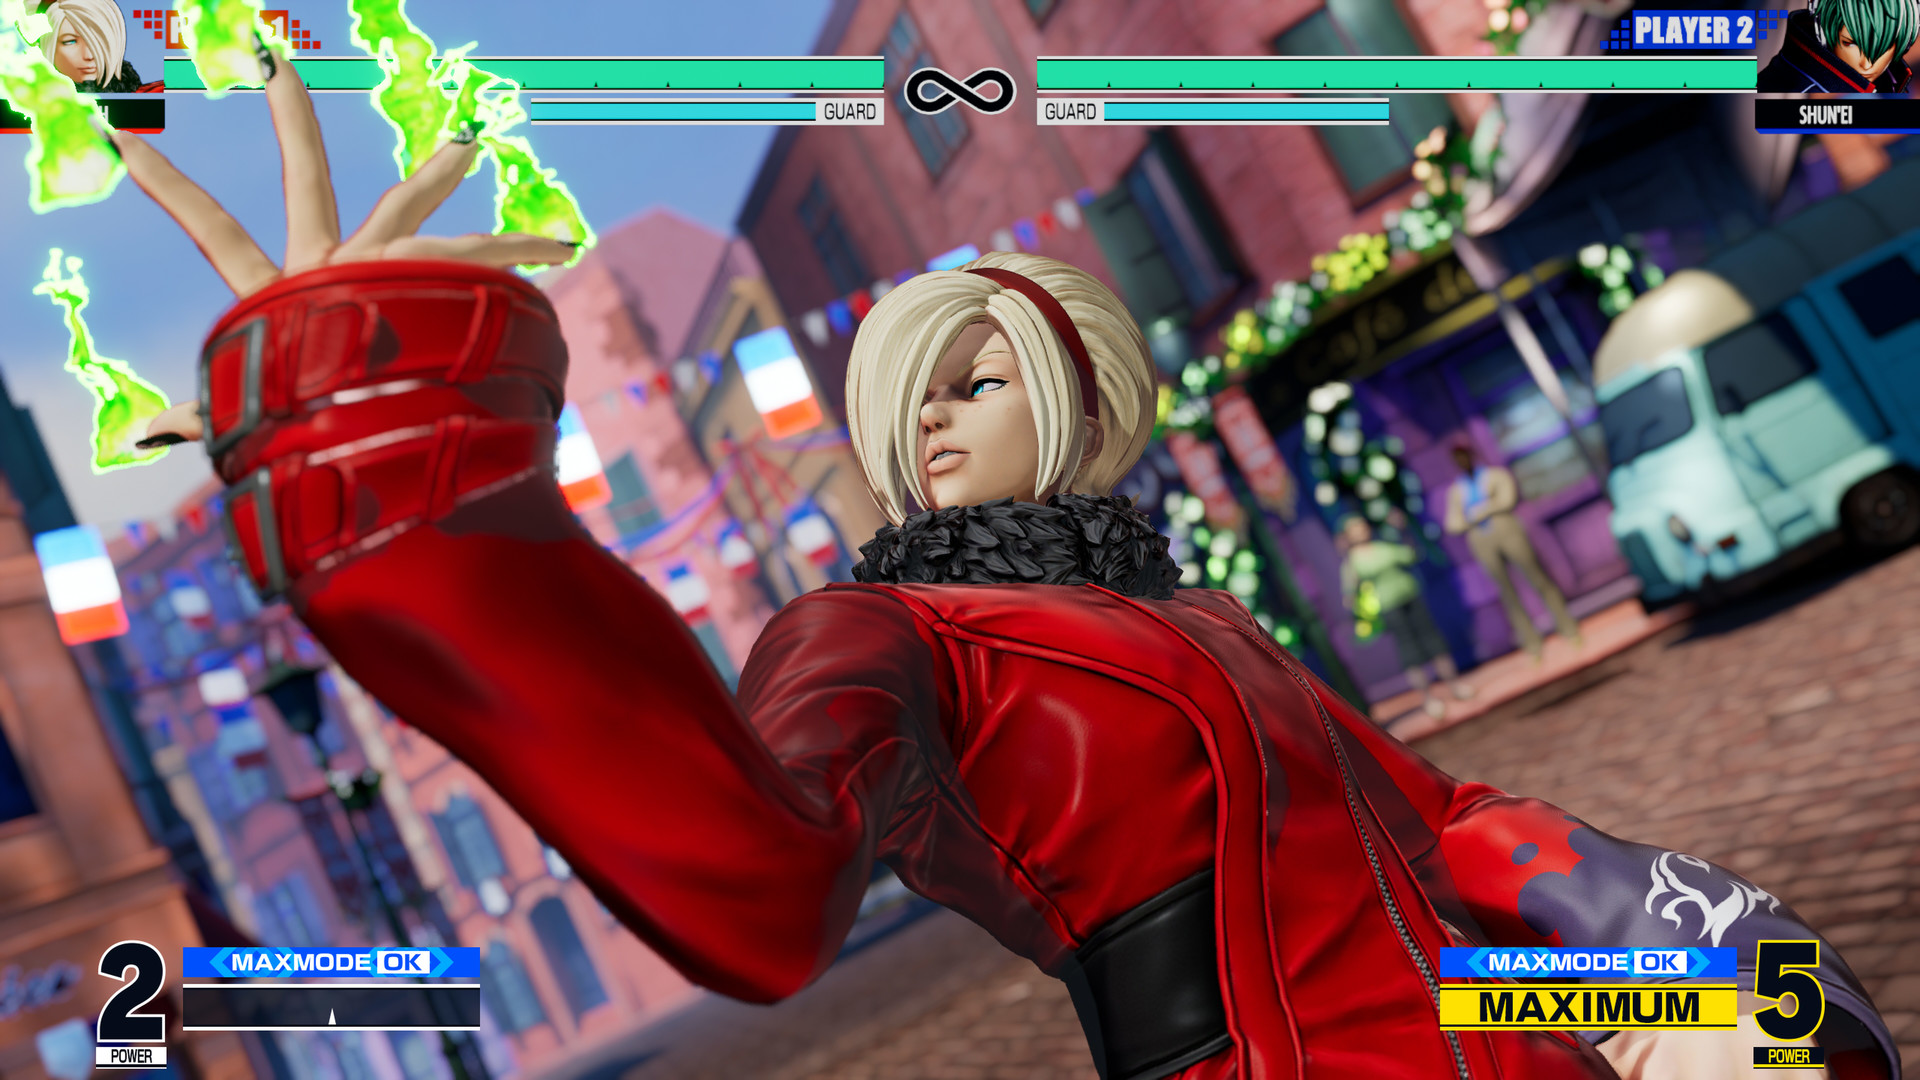 Baixar The King of Fighters XV para pc via torrent